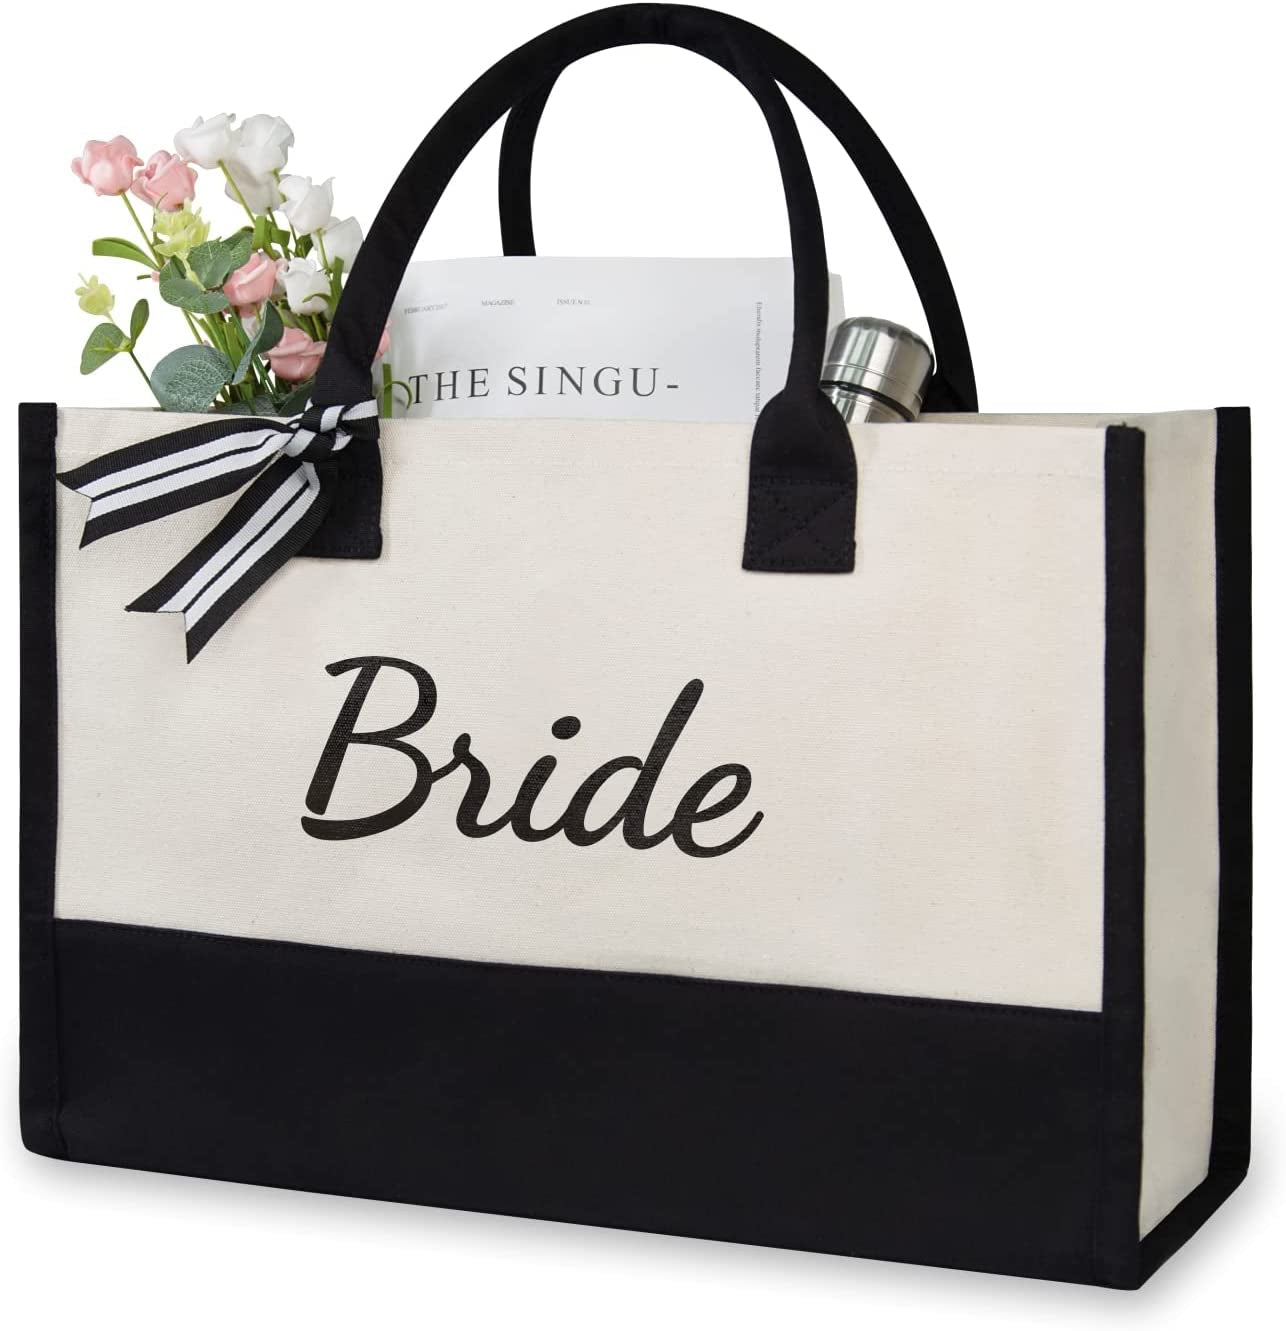 Canvas Tote Bag for Bride, Personalized Bride Gifts for Wedding Bridal Shower Bachelorette Party Engagement Honeymoon, Bridal Accessories Newlyweds Present